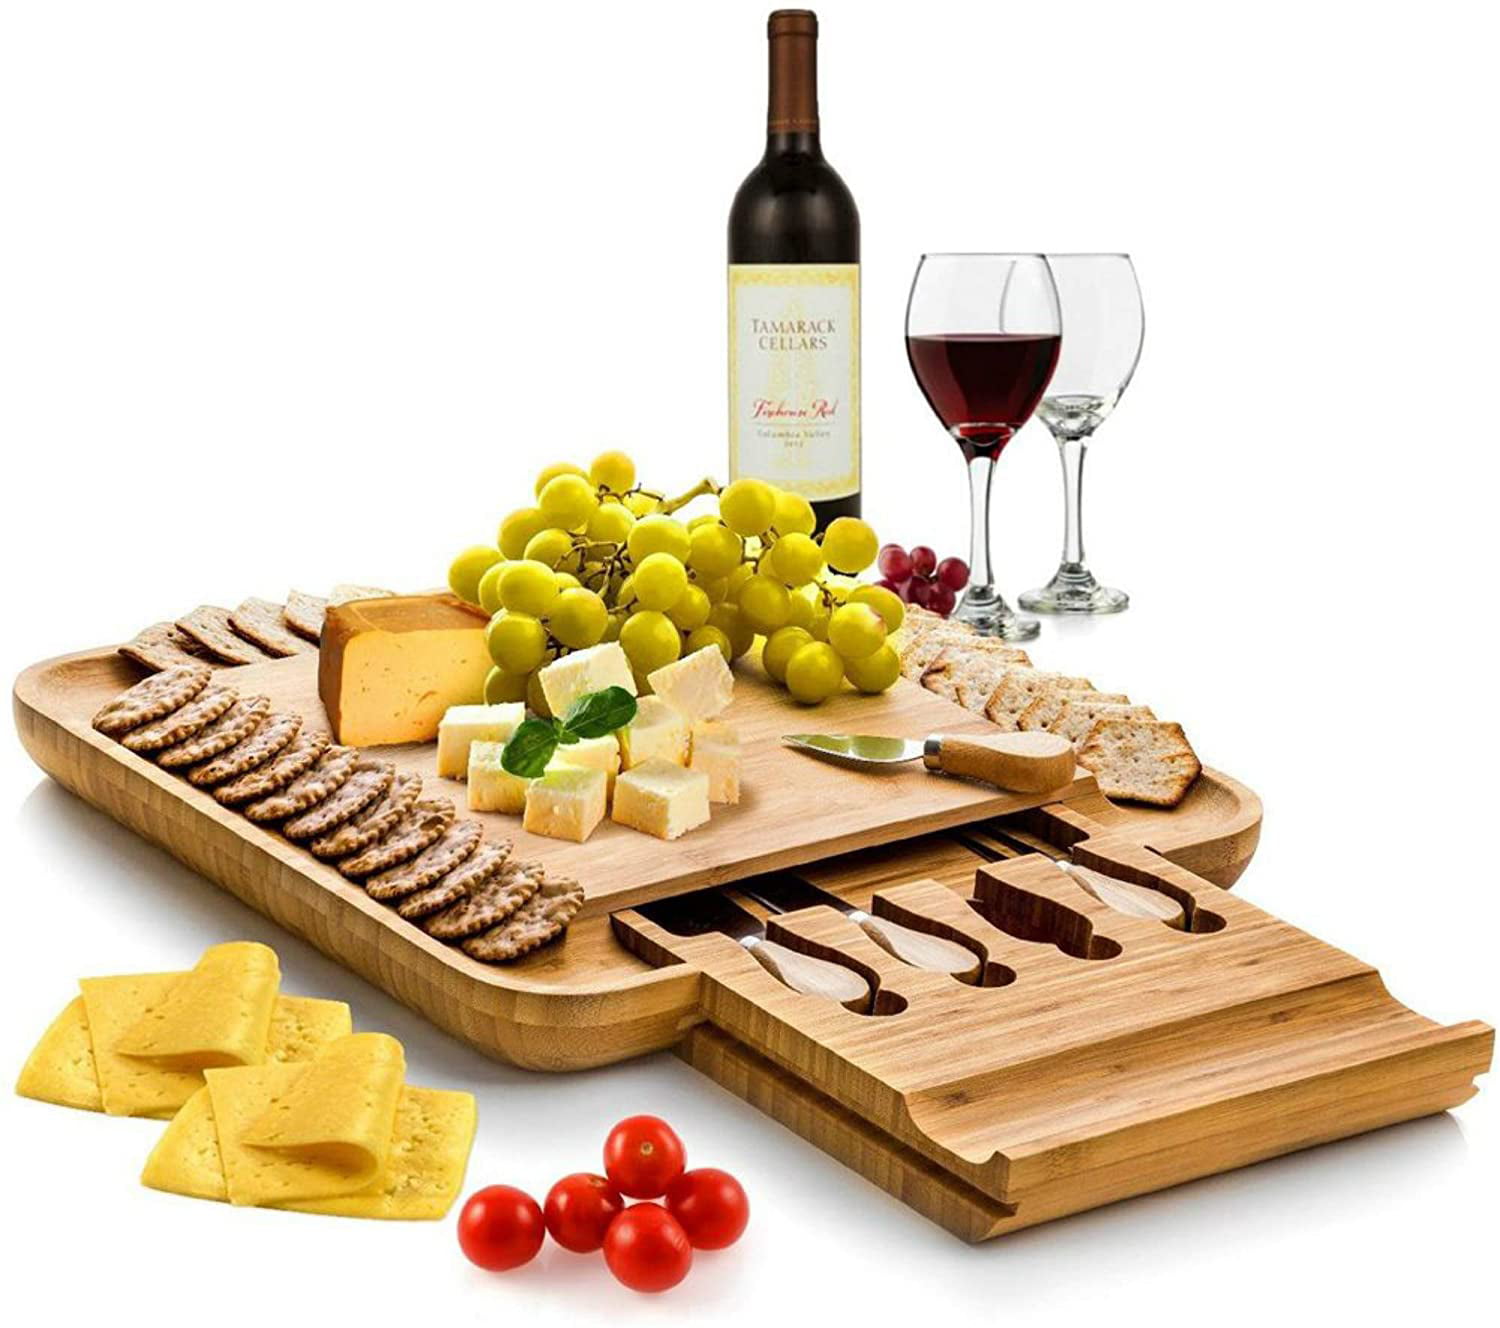 Wooden Charcuterie Server Tray Wedding Presents Organizer for Cutlery and Slicers 2 Slide Drawers Housewarming Gifts 14.7 x 14.7 x 1.6 Inch Large ViralCity Premium Bamboo Cheese Board